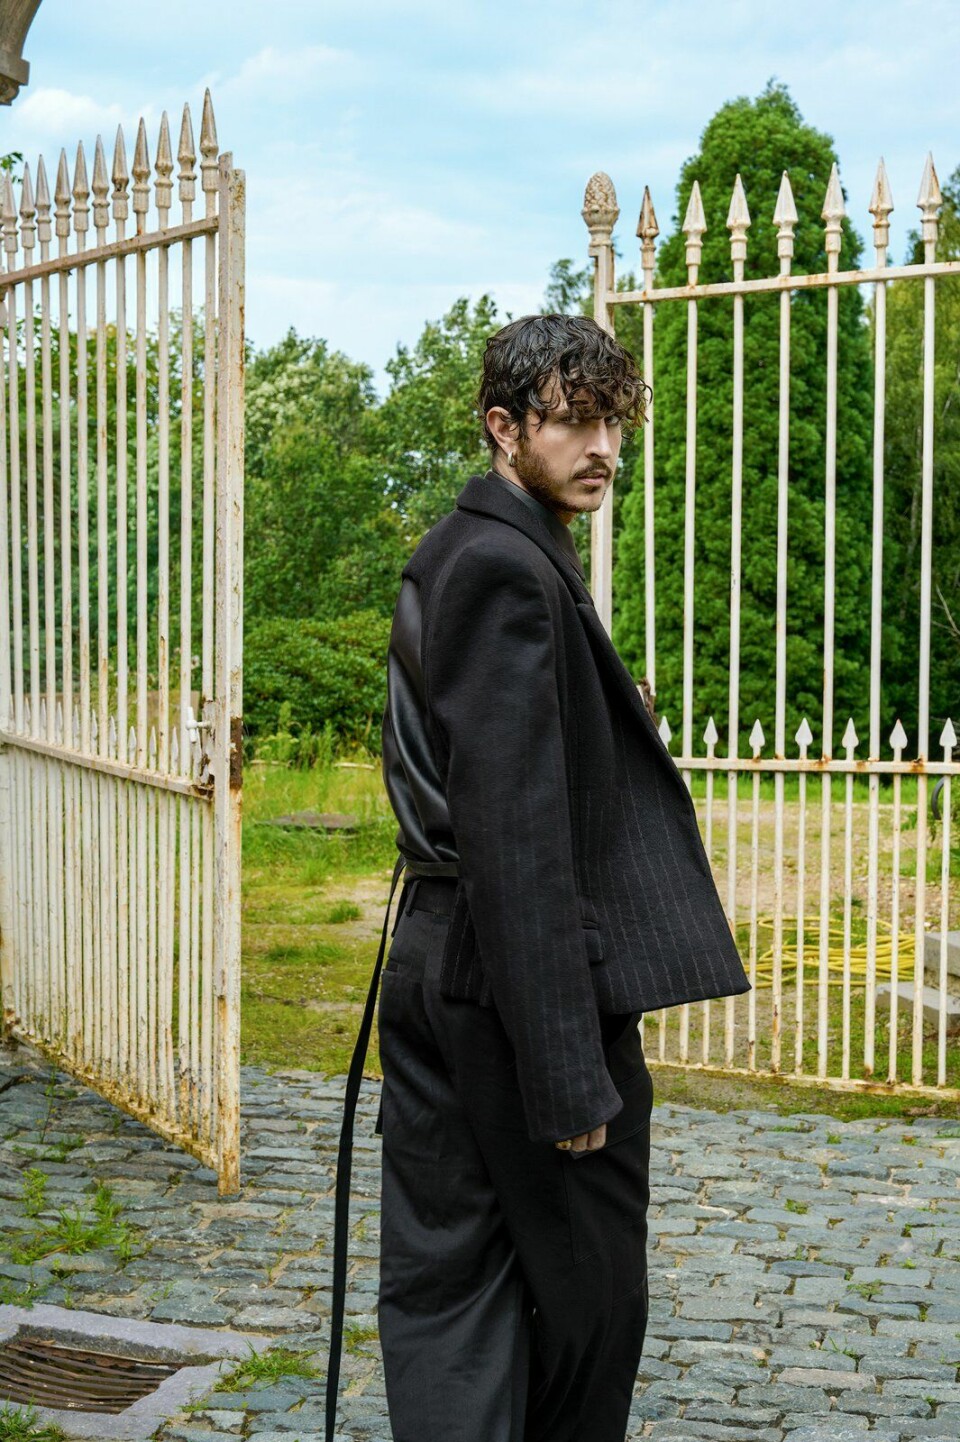 Max Colombie, frontman van Oscar and the Wolf